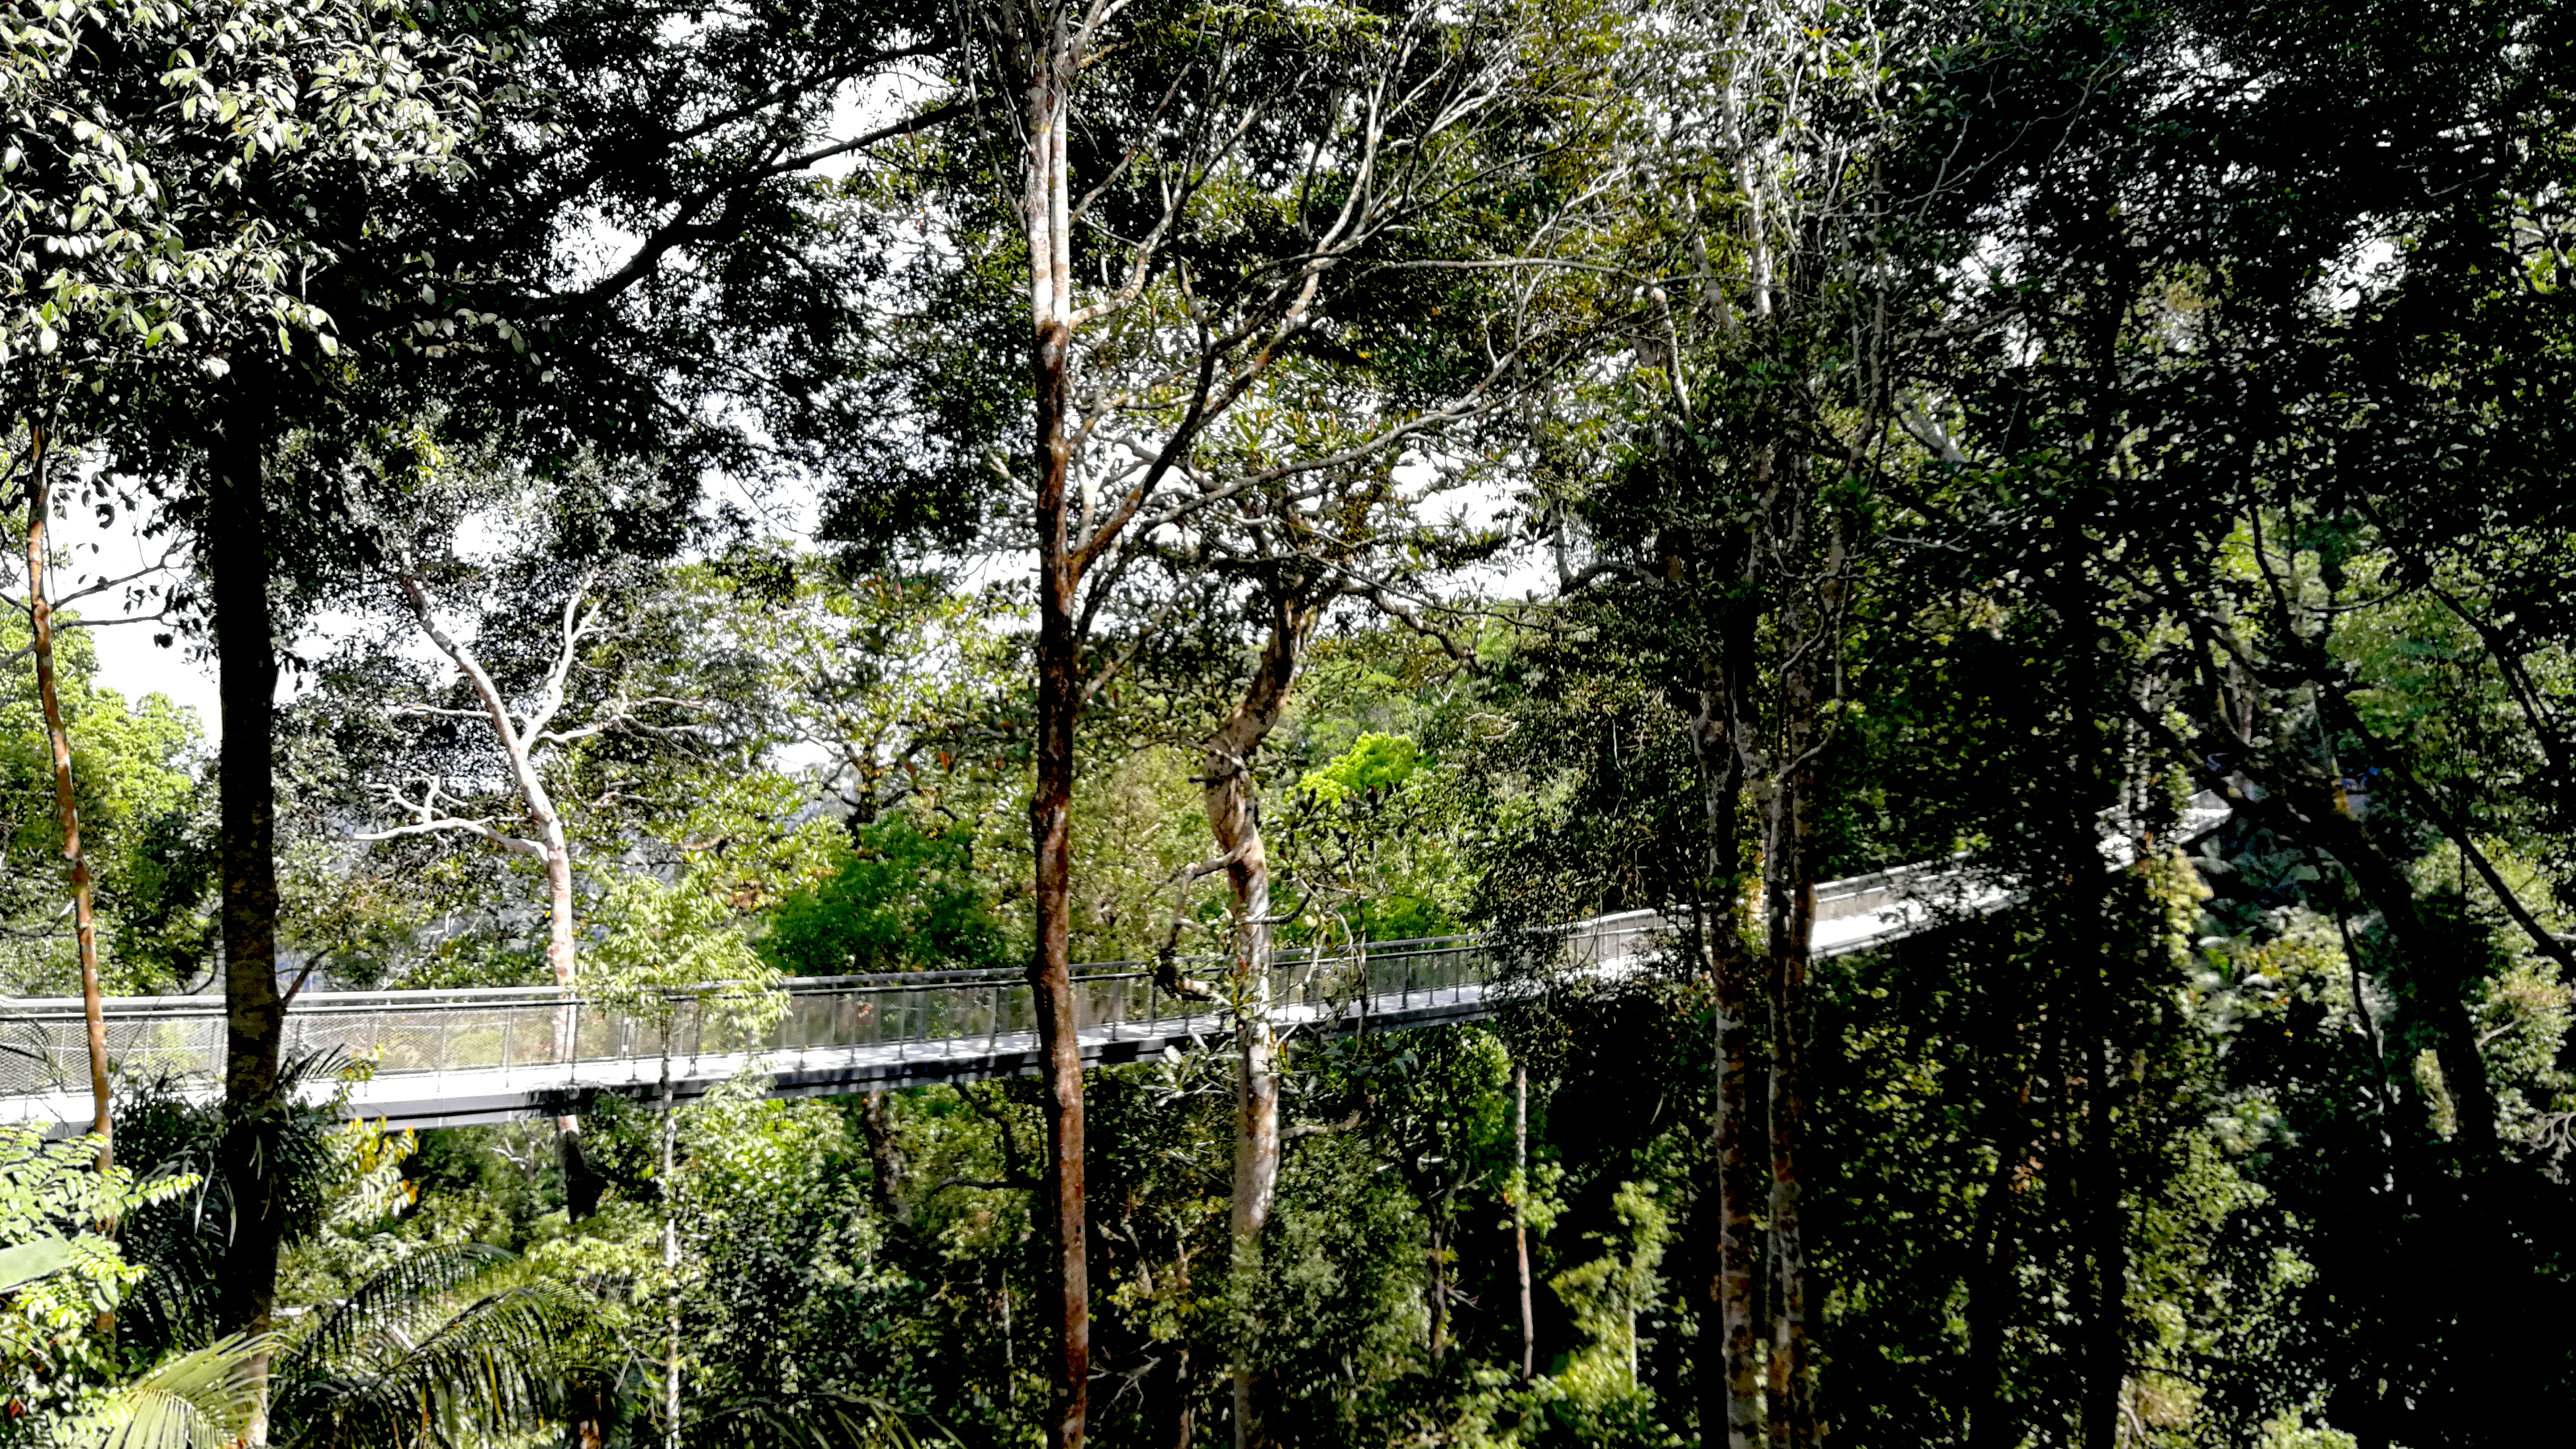 A reprieve from the crowds and traffic is The Habitat Penang Hill, an eco-tourism attraction on the fringe of a 130 million-year-old forest reserve. It combines fun experiences like a treetop walk with excellent free tours that educate visitors on Penang’s rich biodiversity and the need for conservation. Photo by Alexandra Wong